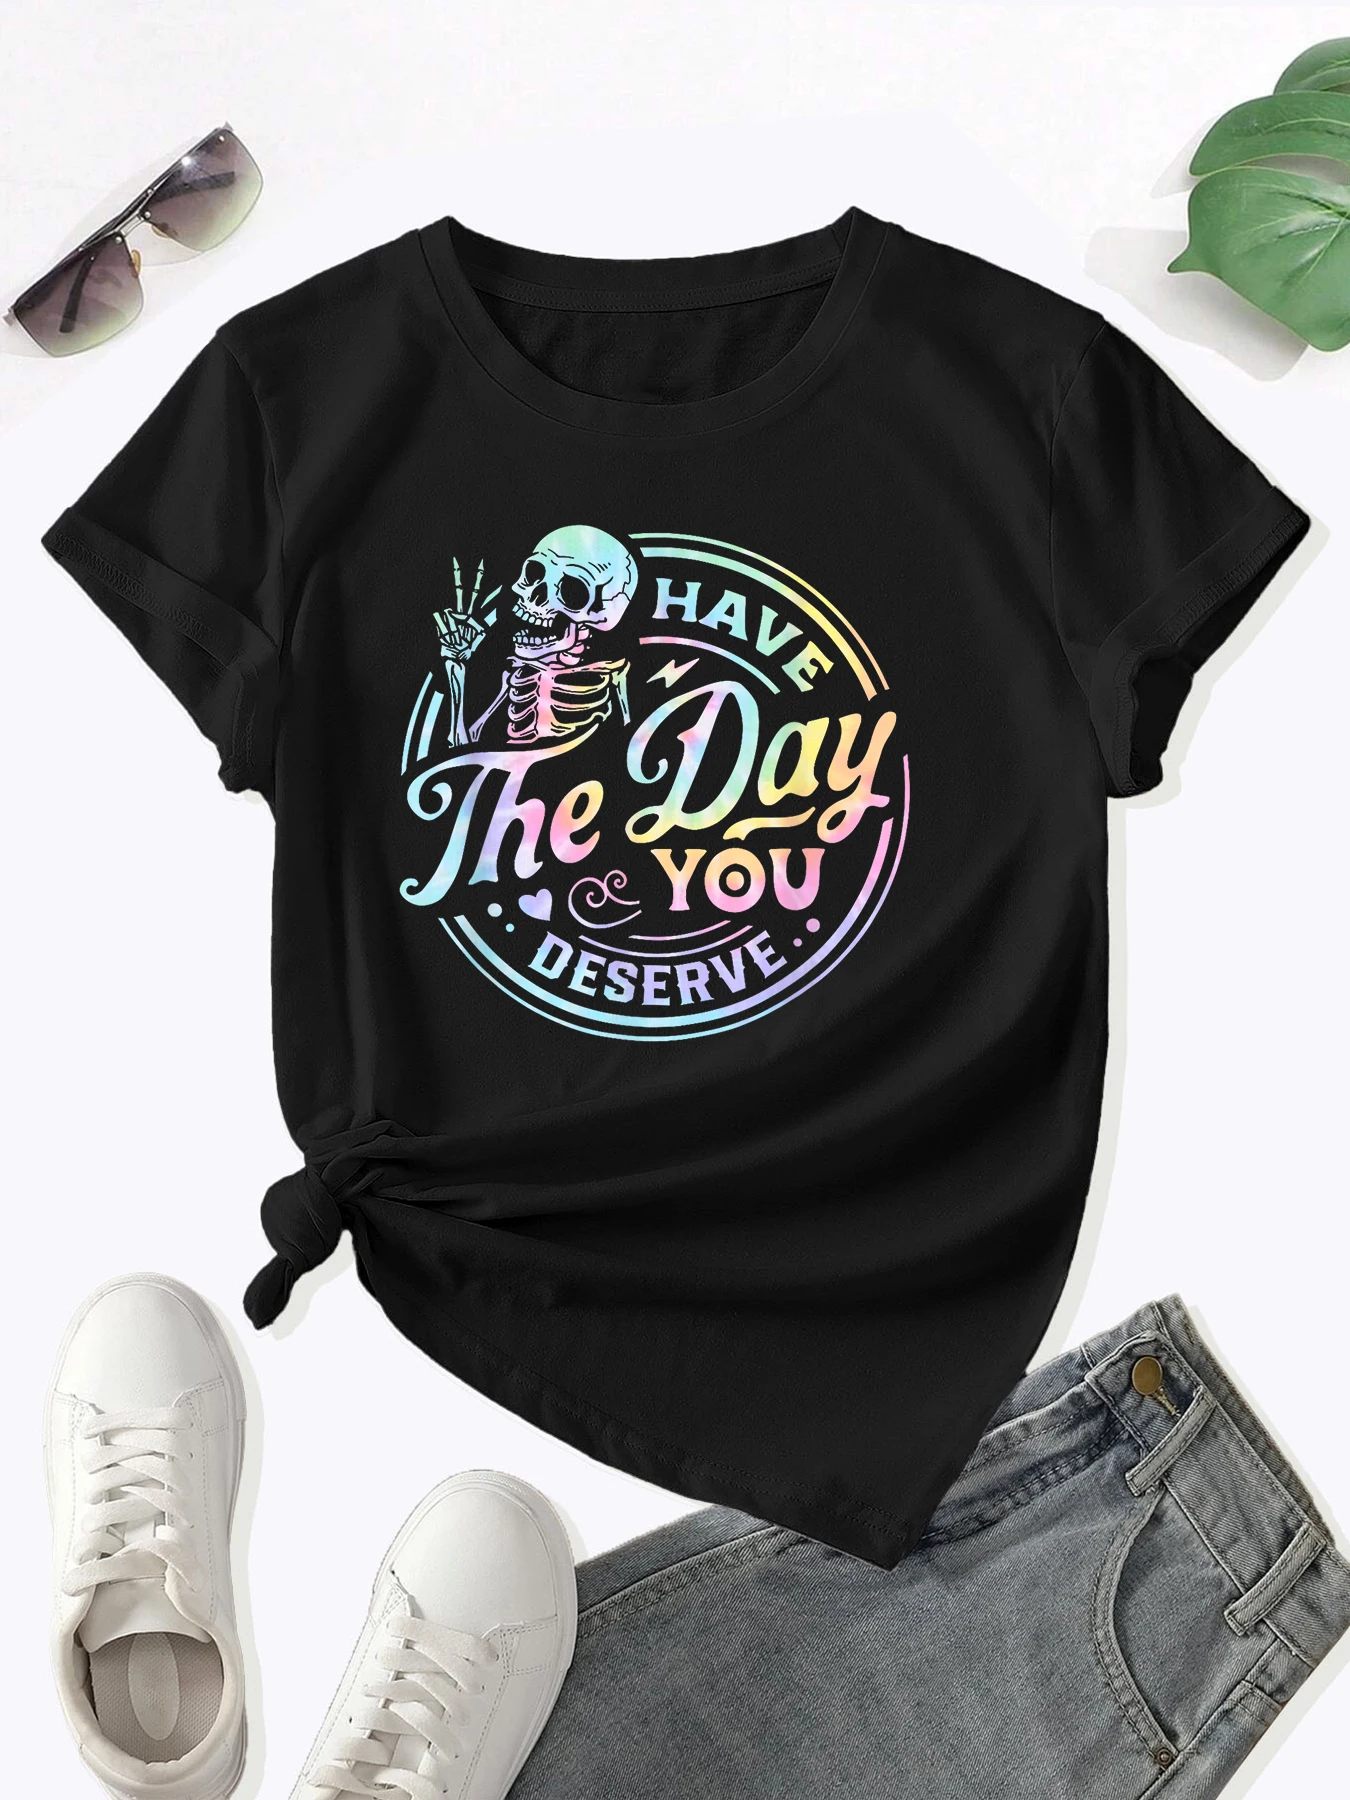 

100% cotton women's short-sleeved T-shirt The Day in colorful skull print, crew neck, multiple colors, sizes XS to 3XL